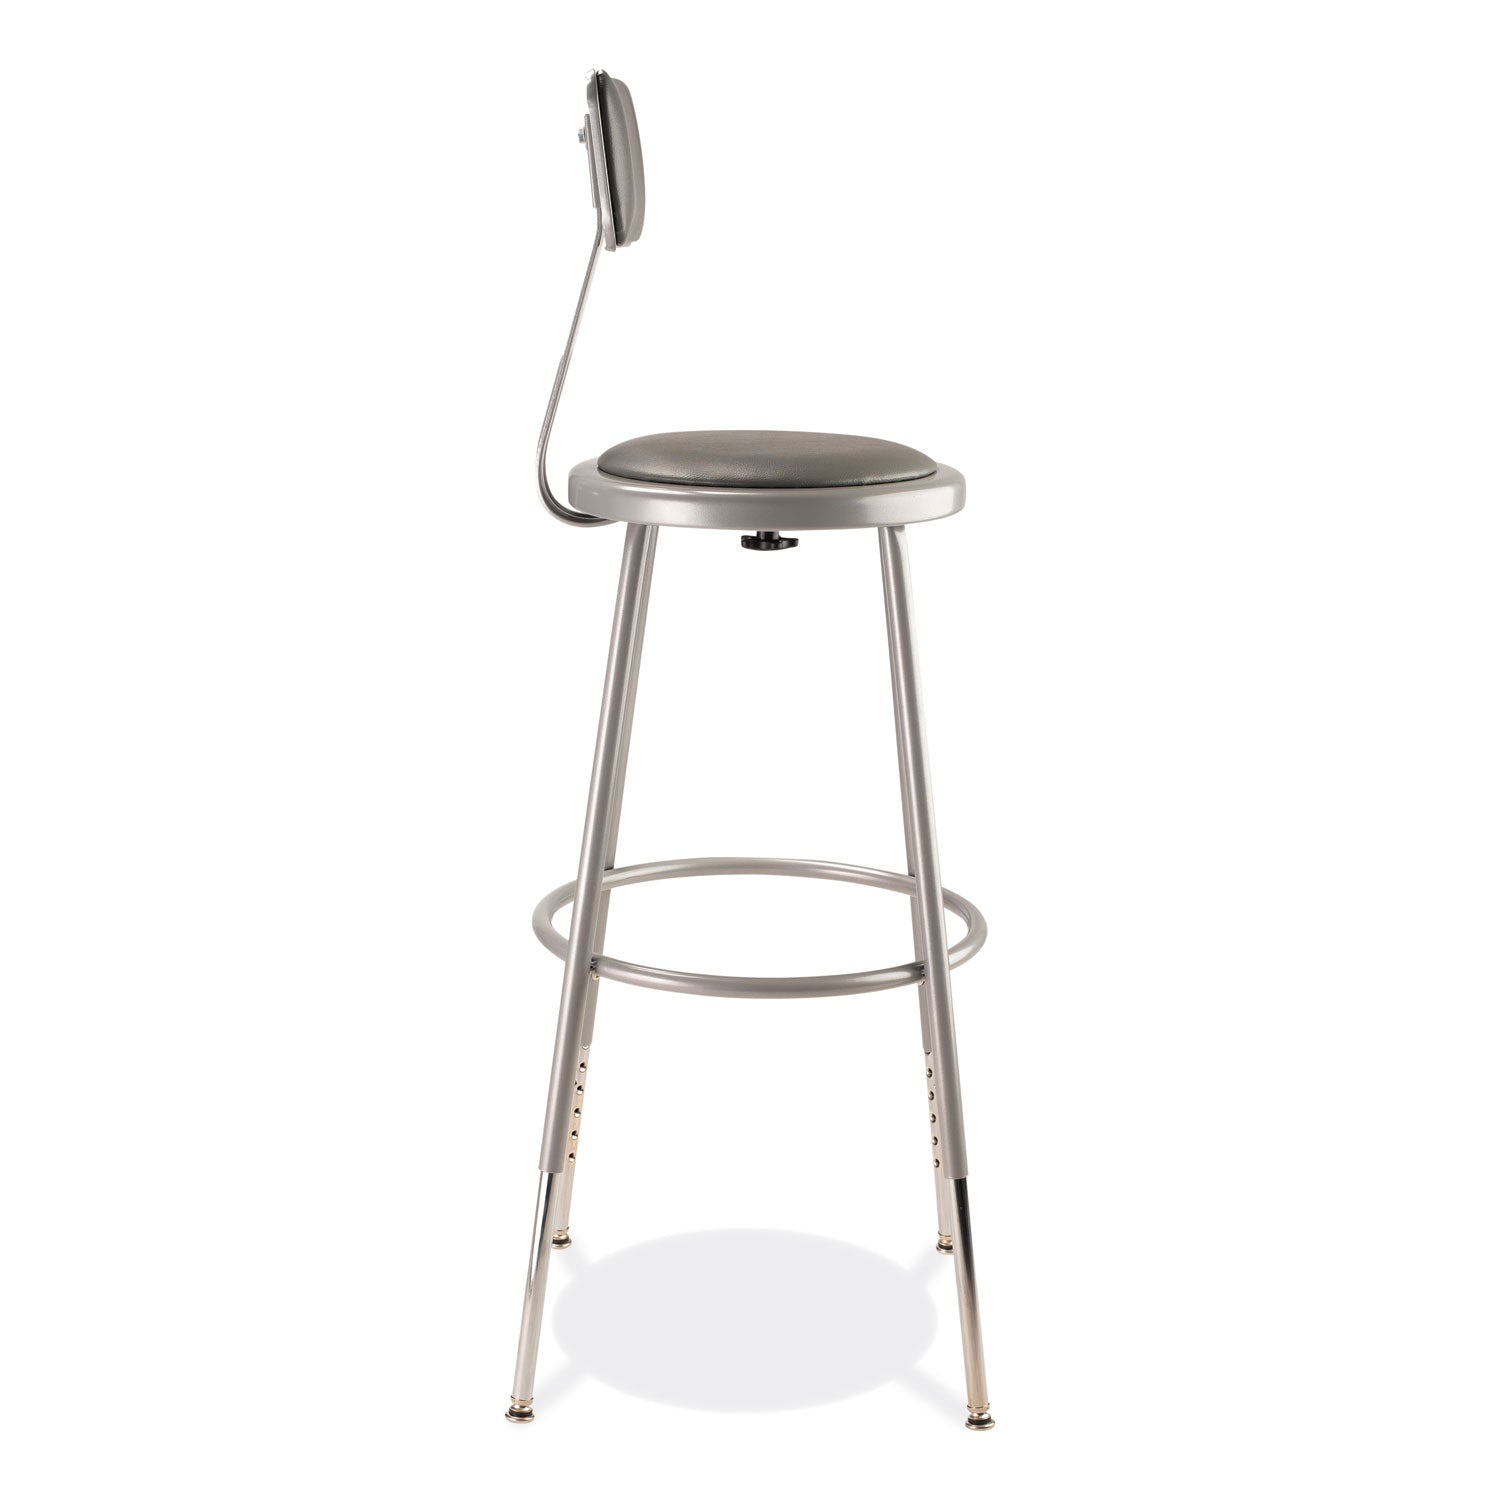 6400-series-height-adjustable-heavy-duty-padded-stool-w-backrest-supports-300lb-25-33-seat-ht-grayships-in-1-3-bus-days_nps6424hb - 2